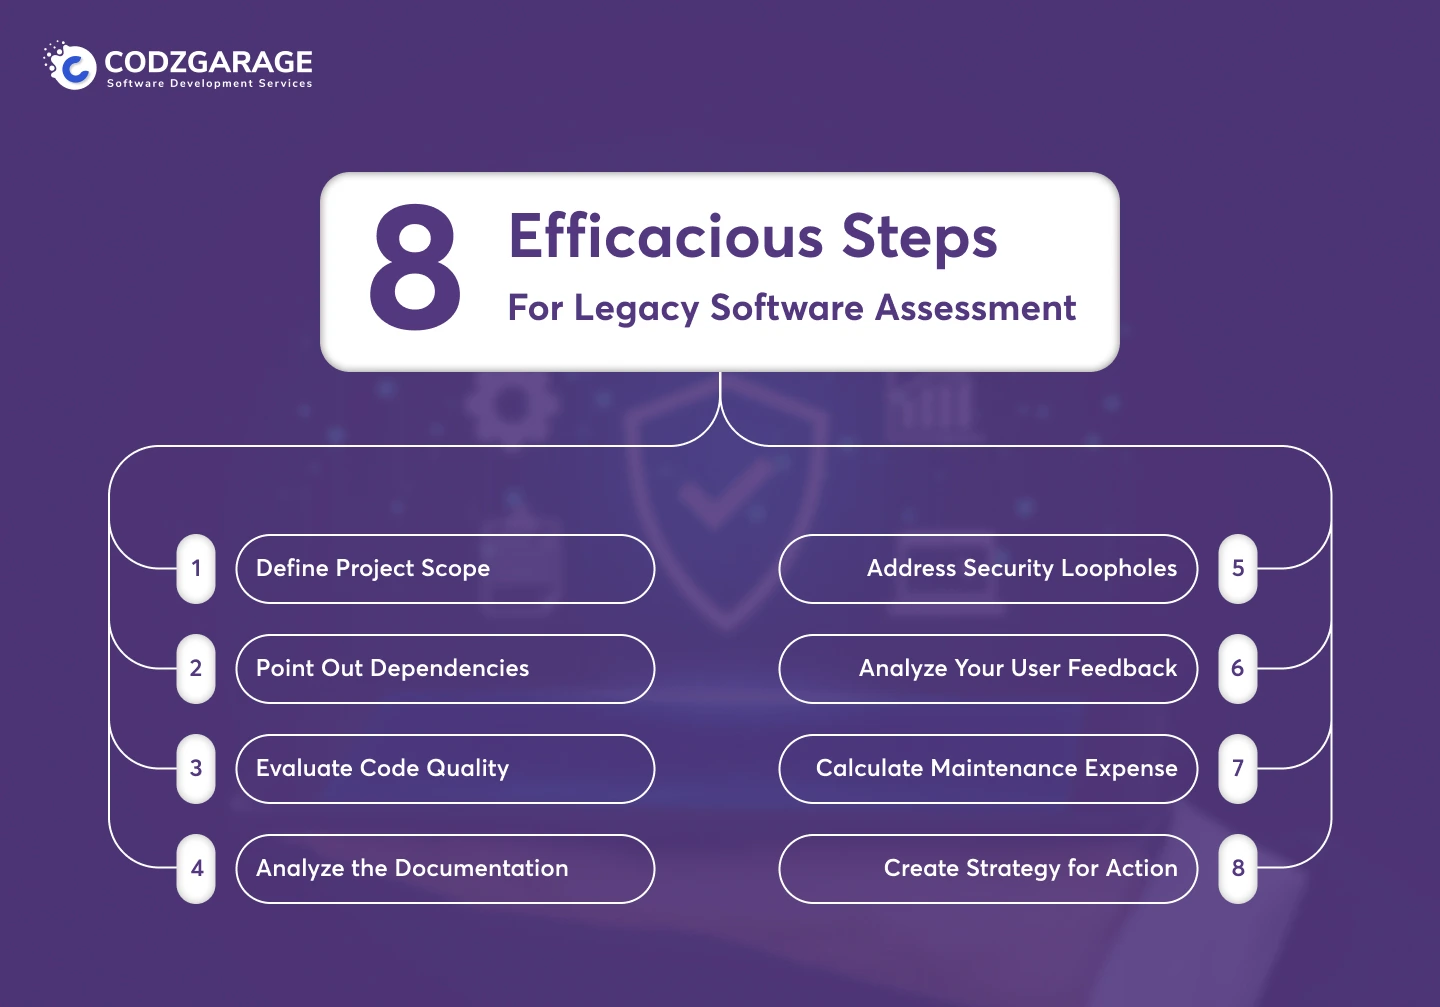 8-efficacious-steps-for-legacy-software-assessment